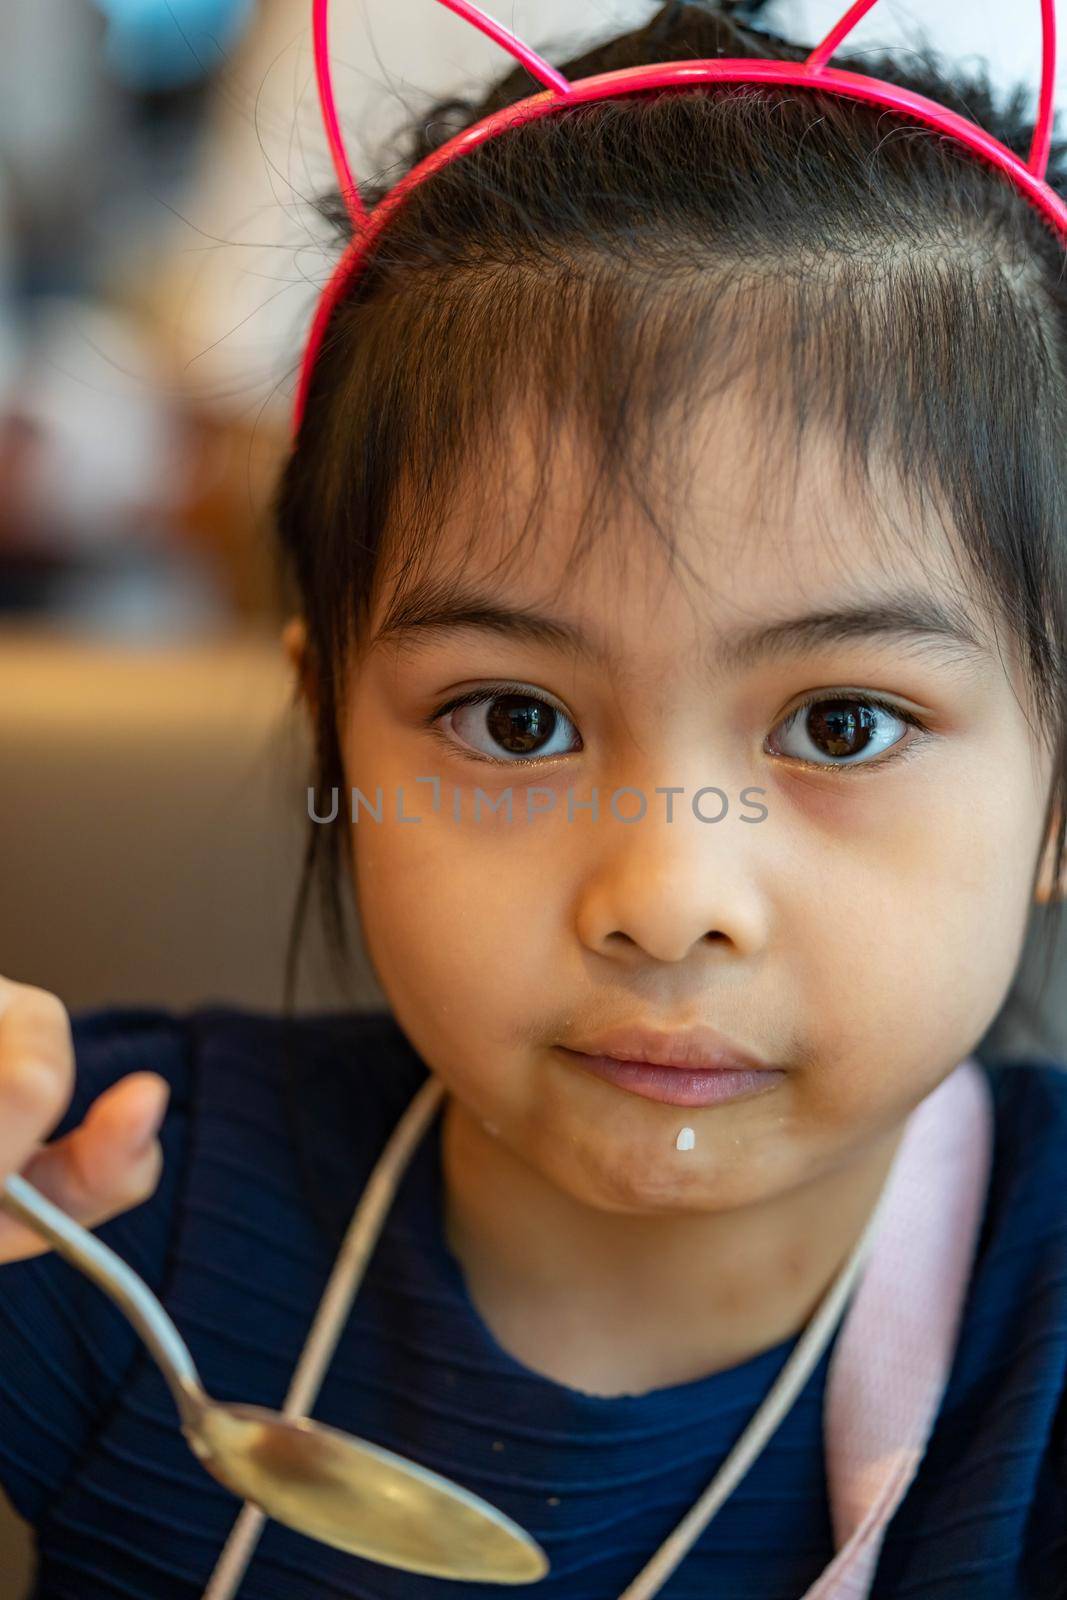 Female asian child while eating rice using spoon. Child enjoys eating rice by her own. Child learning to use spoon and eat by her own